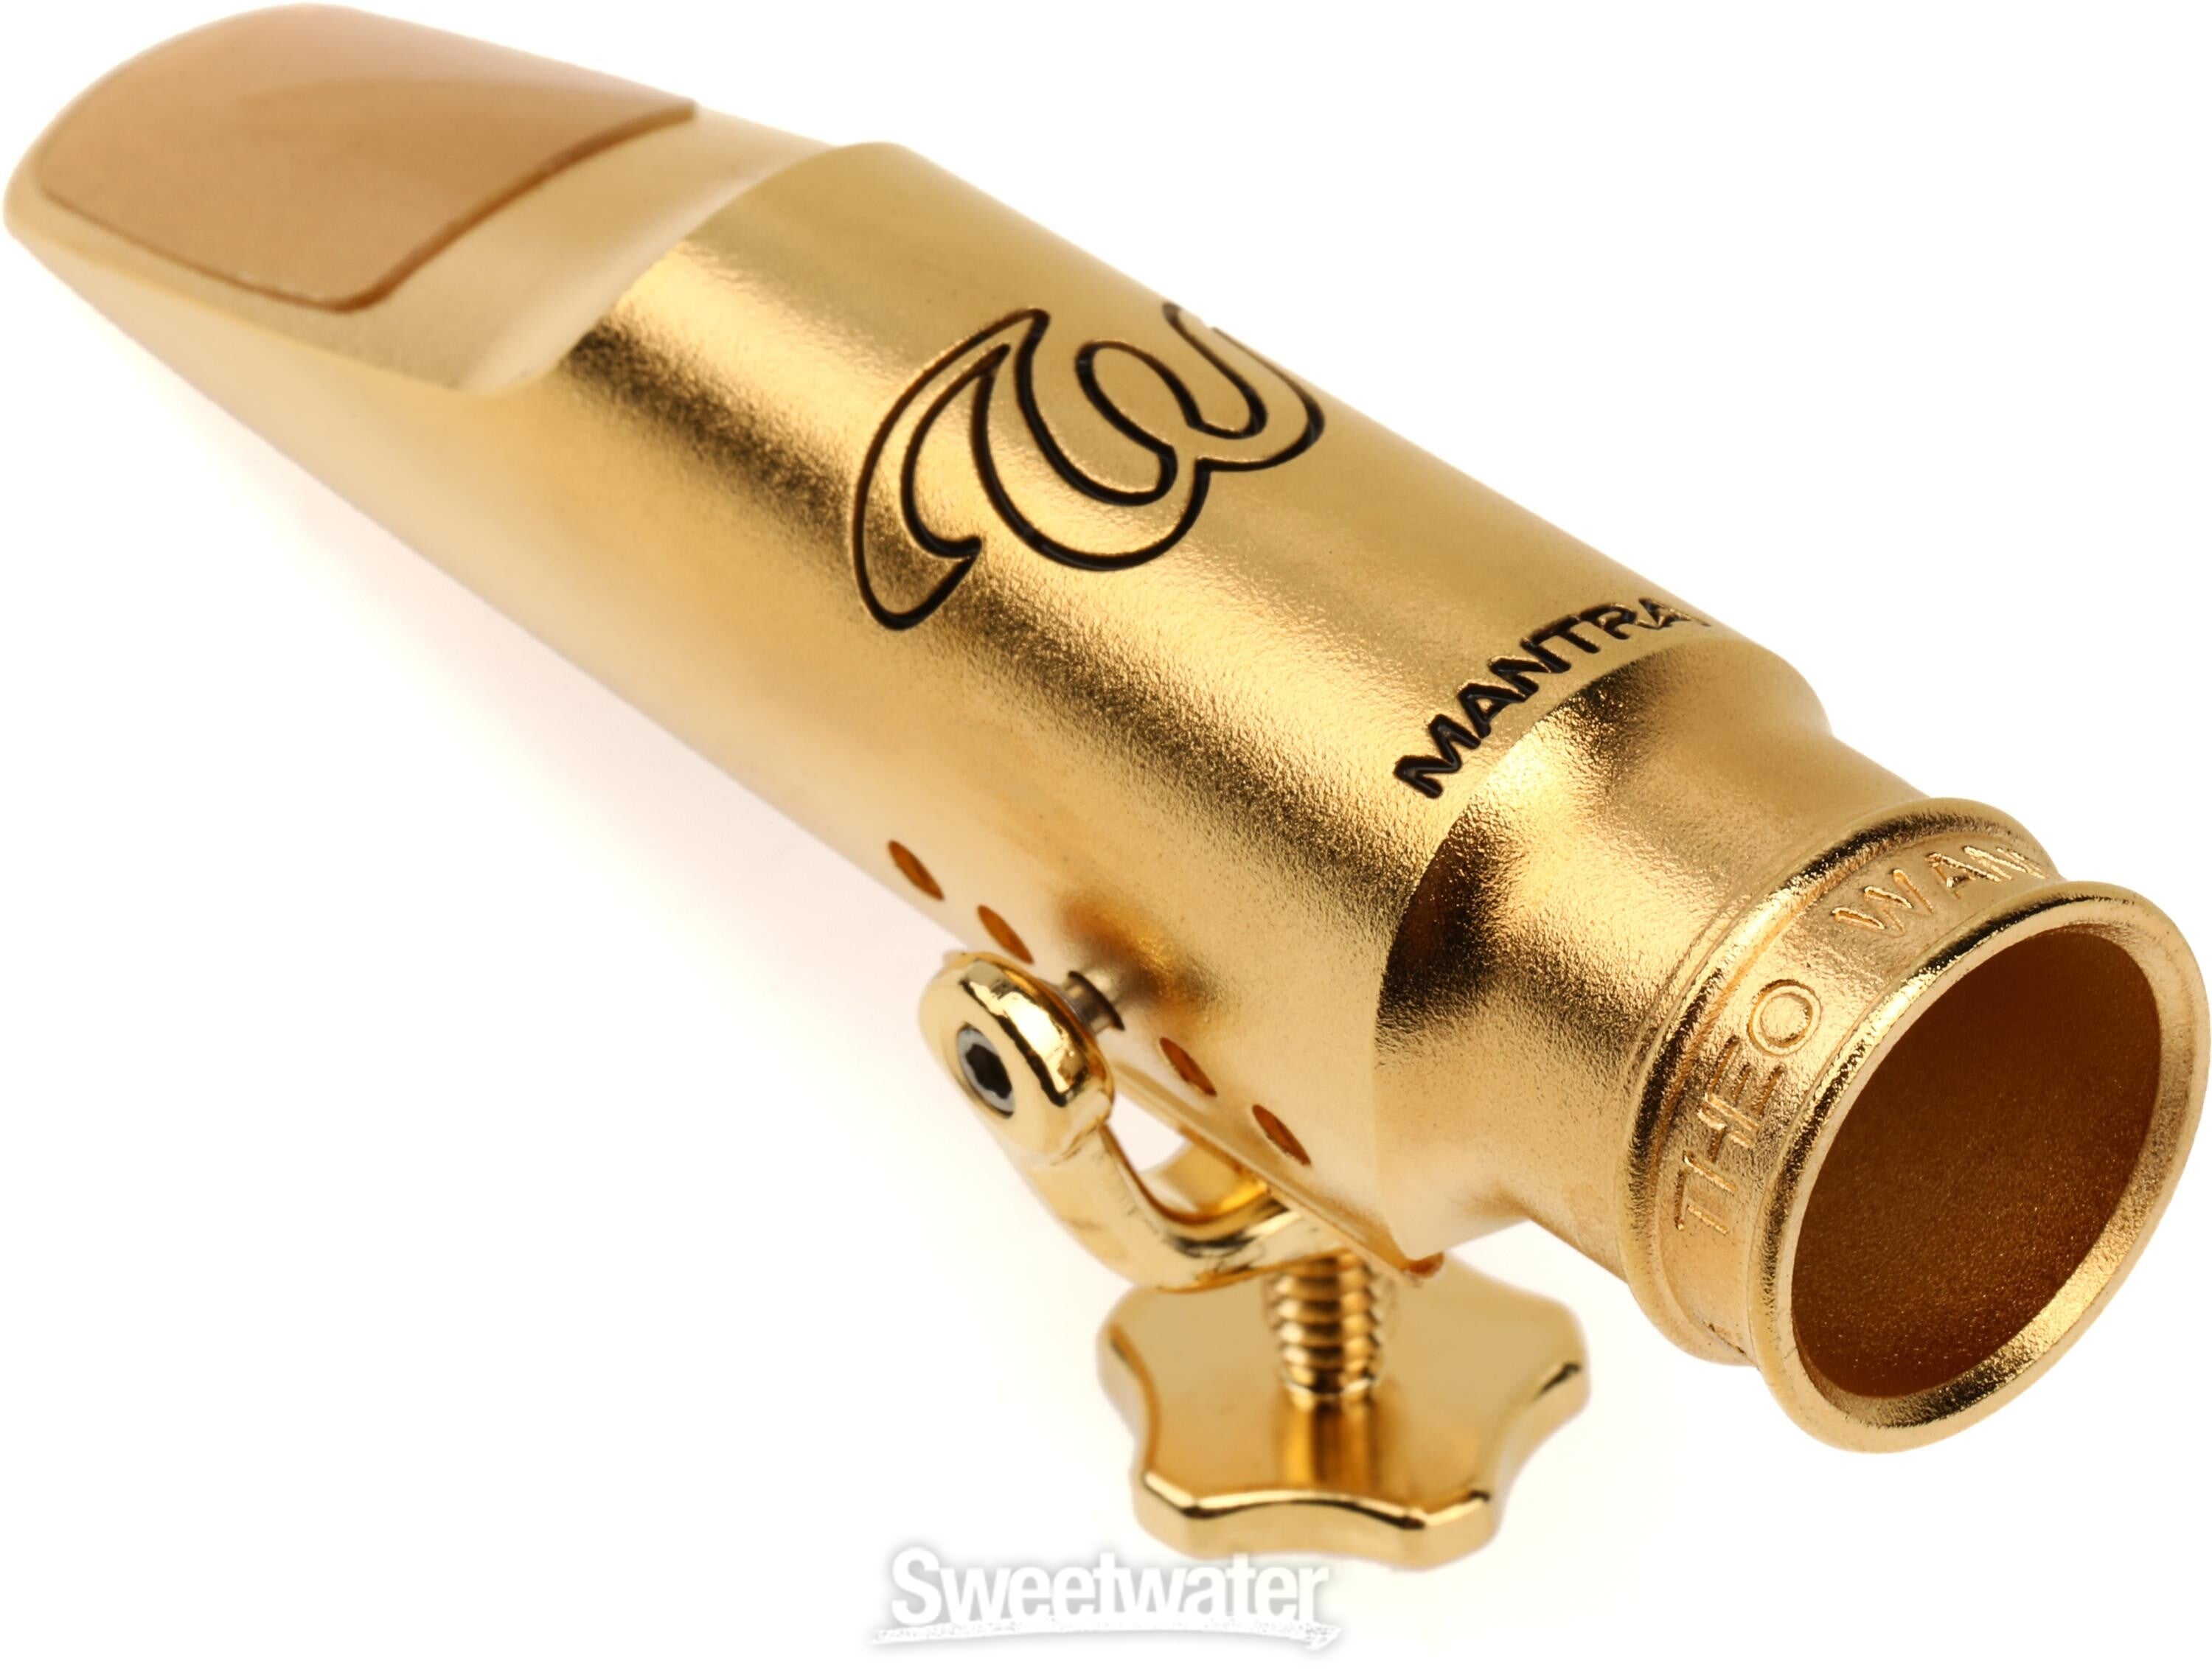 MAN-TG7S Mantra Tenor Saxophone Mouthpiece - 7* Gold-plated 